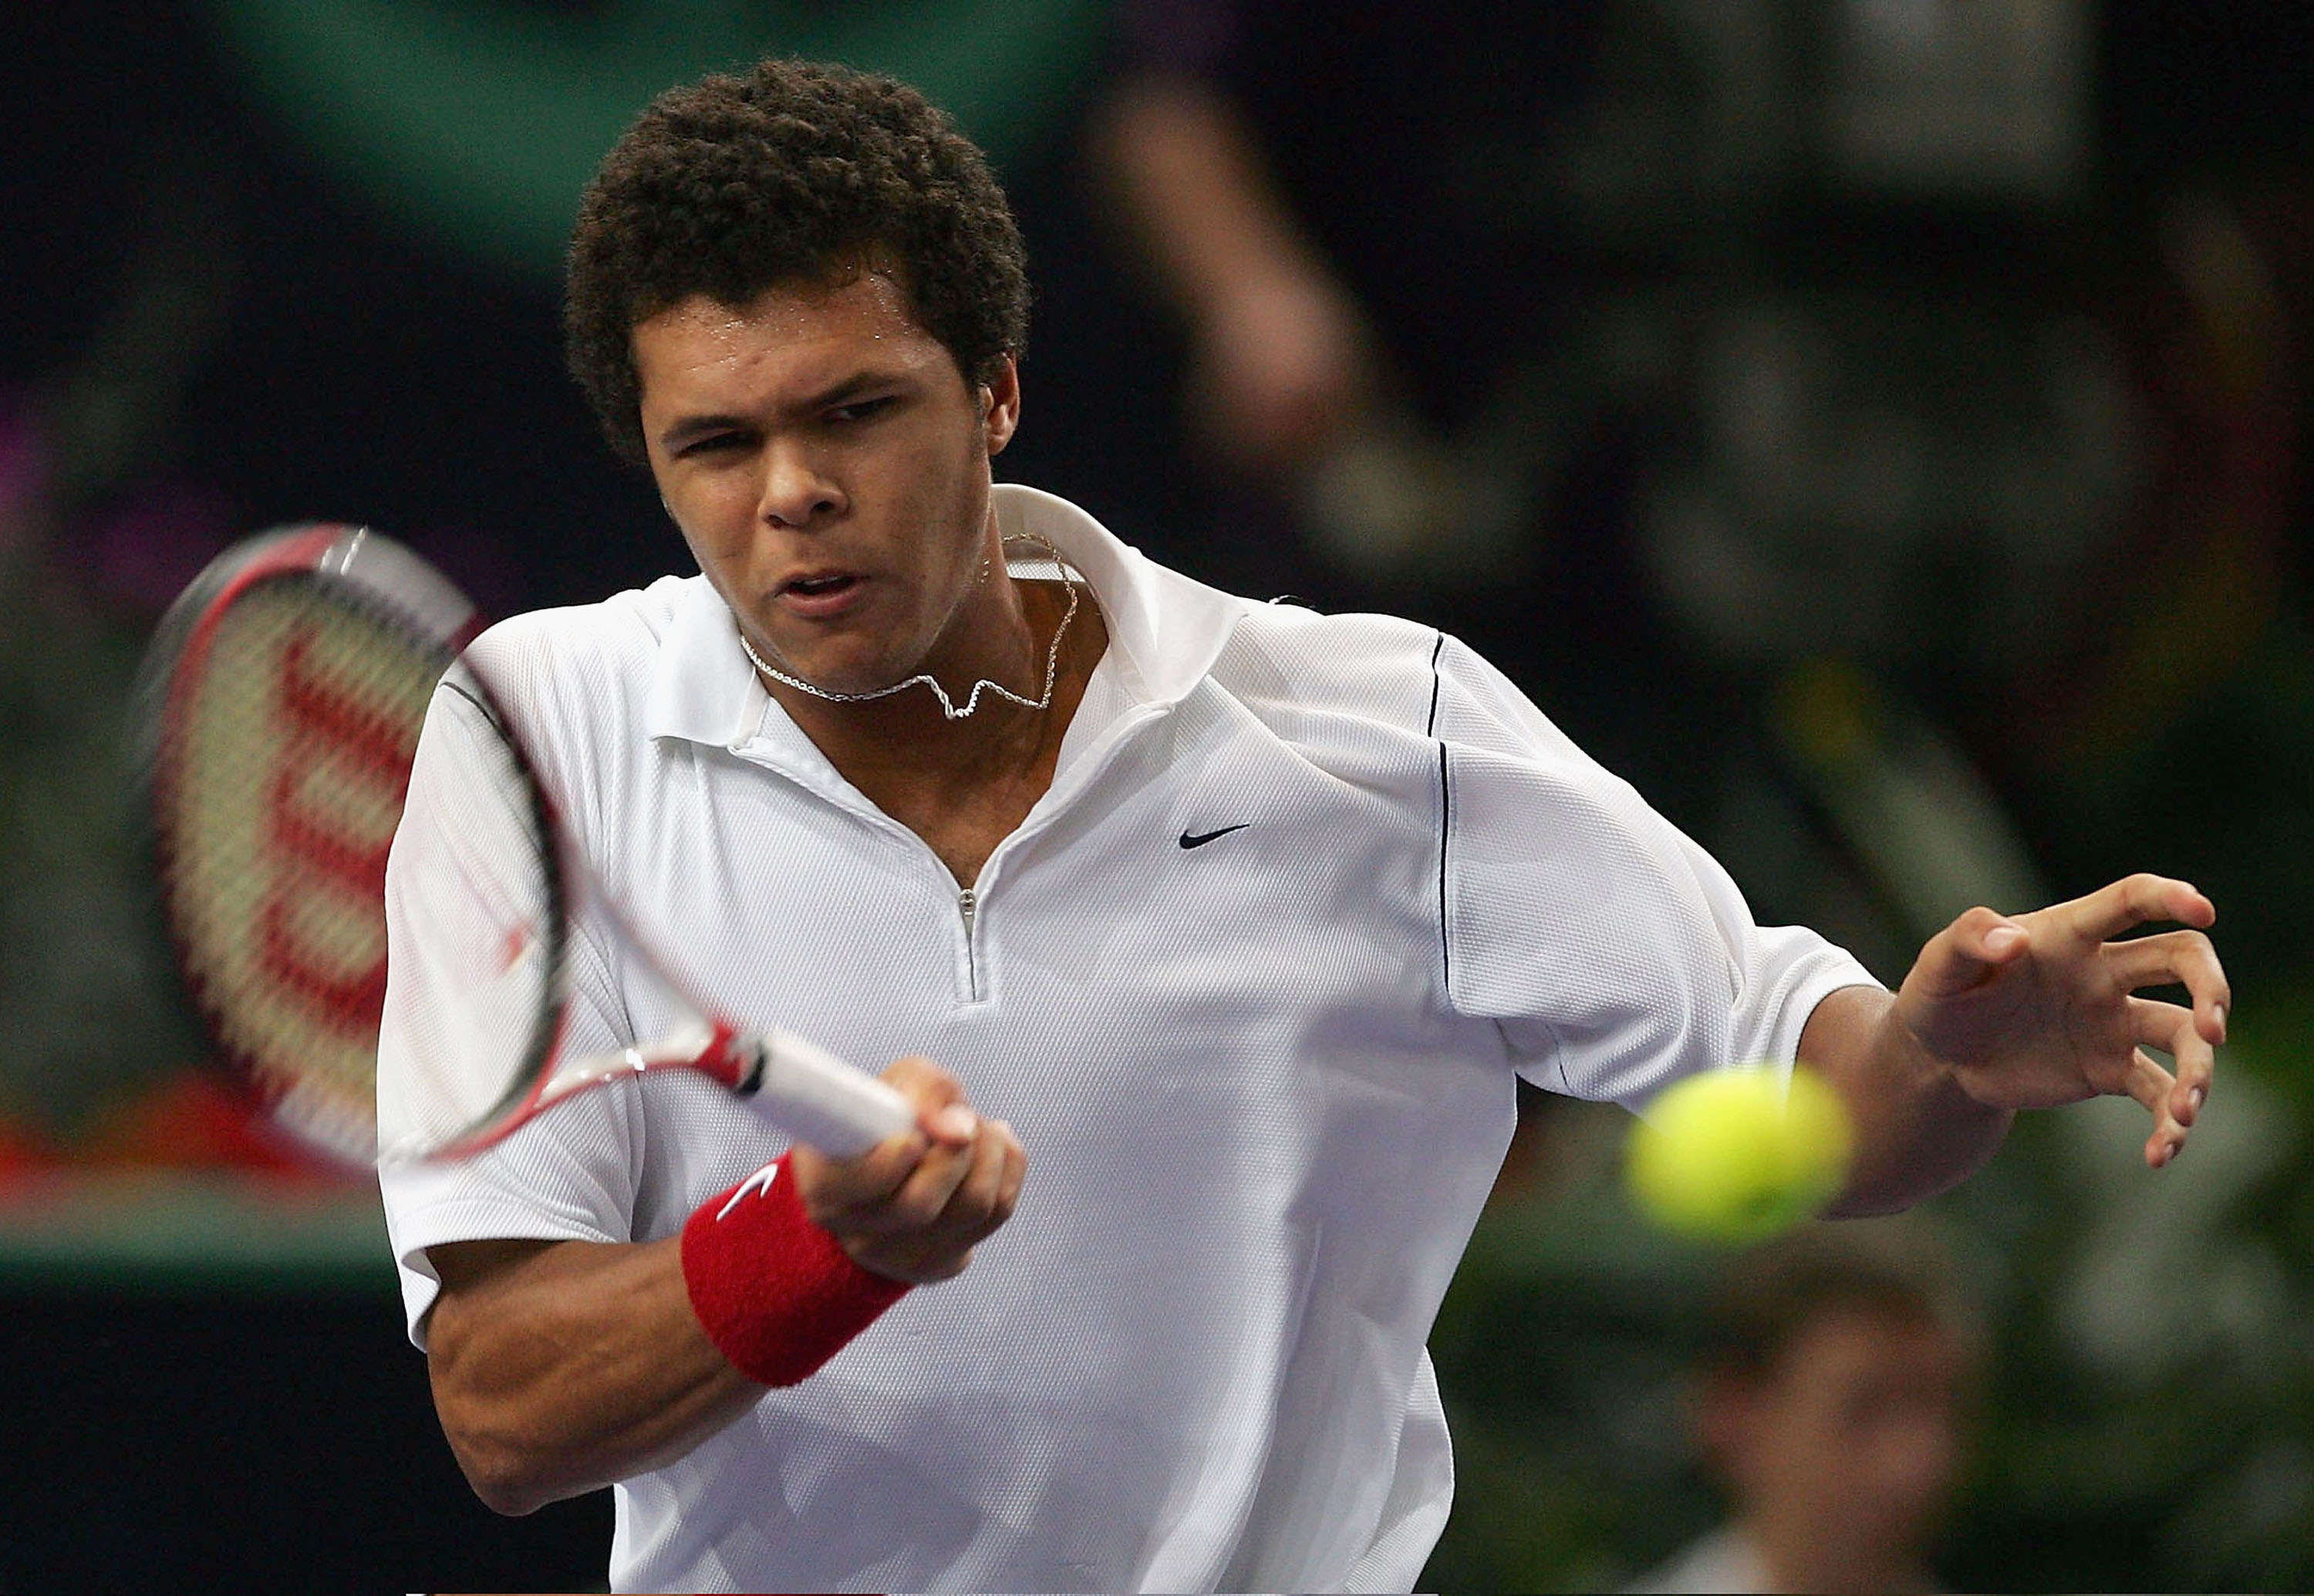 Jo-Wilfried Tsonga in 2004 (age 19) | Business Insider India